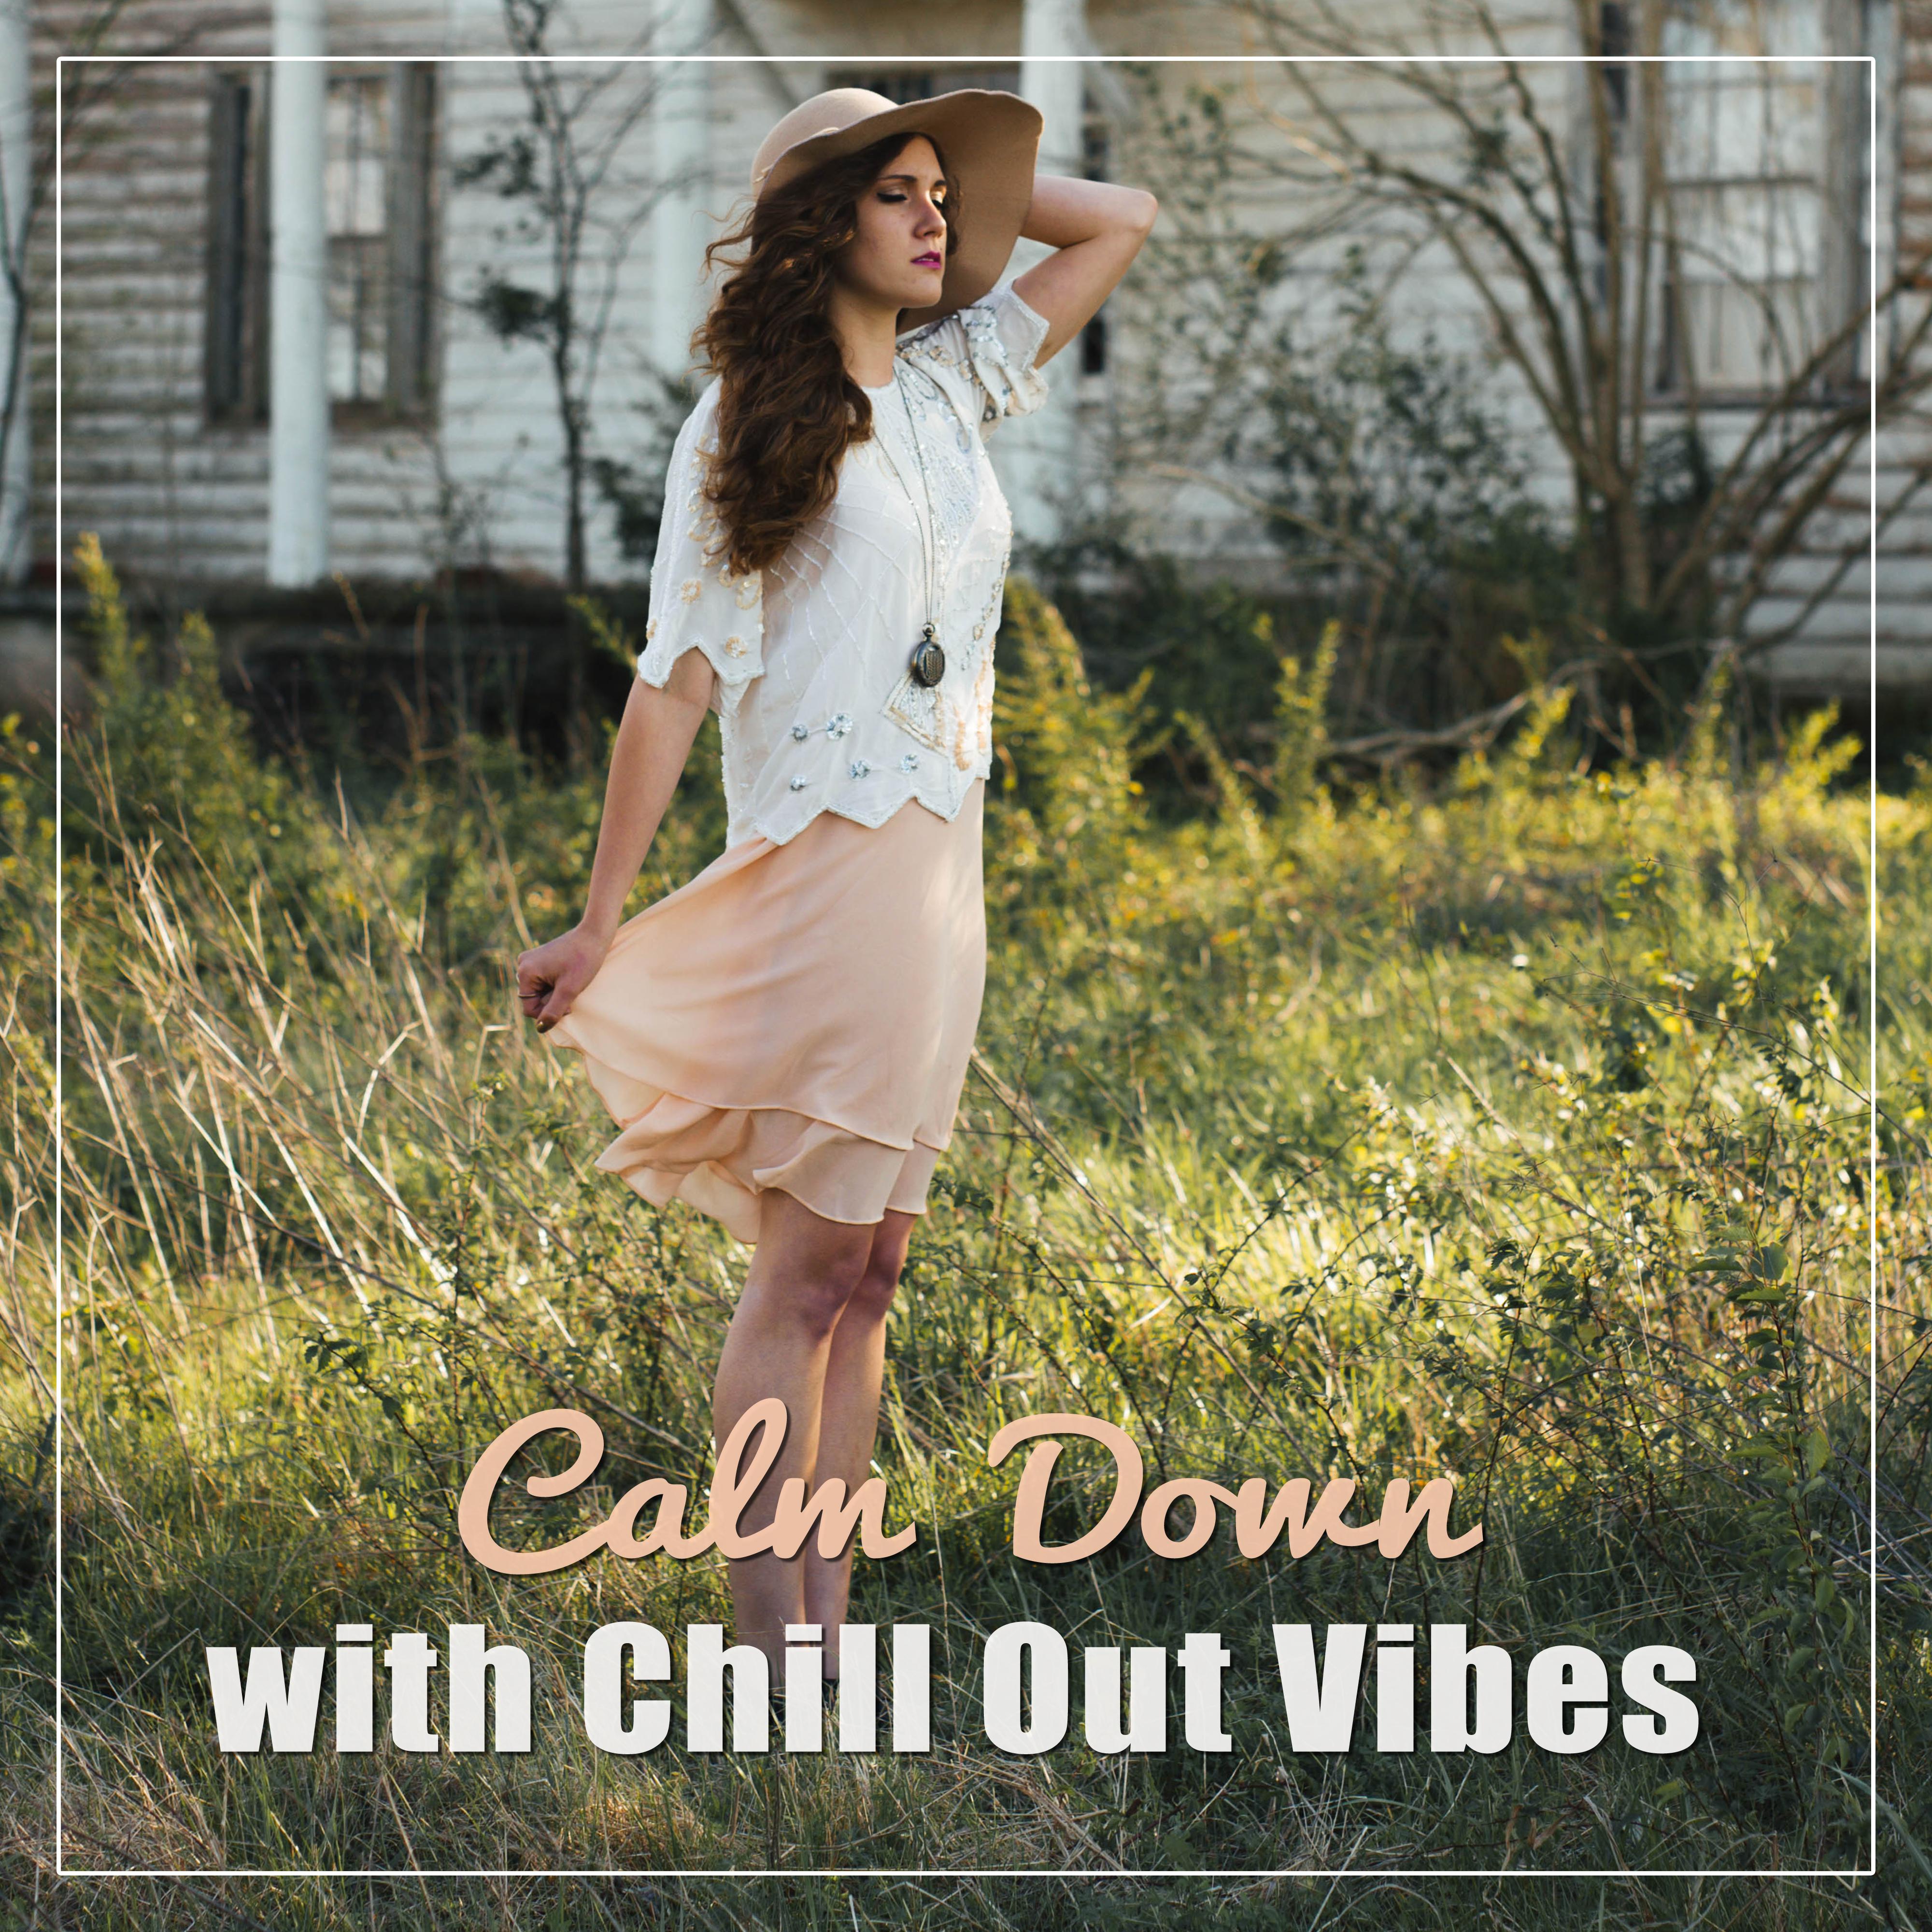 Calm Down with Chill Out Vibes  Rest with Chill Out, Peaceful Mind, Tropical Relaxation, Stress Relief, Inner Silence